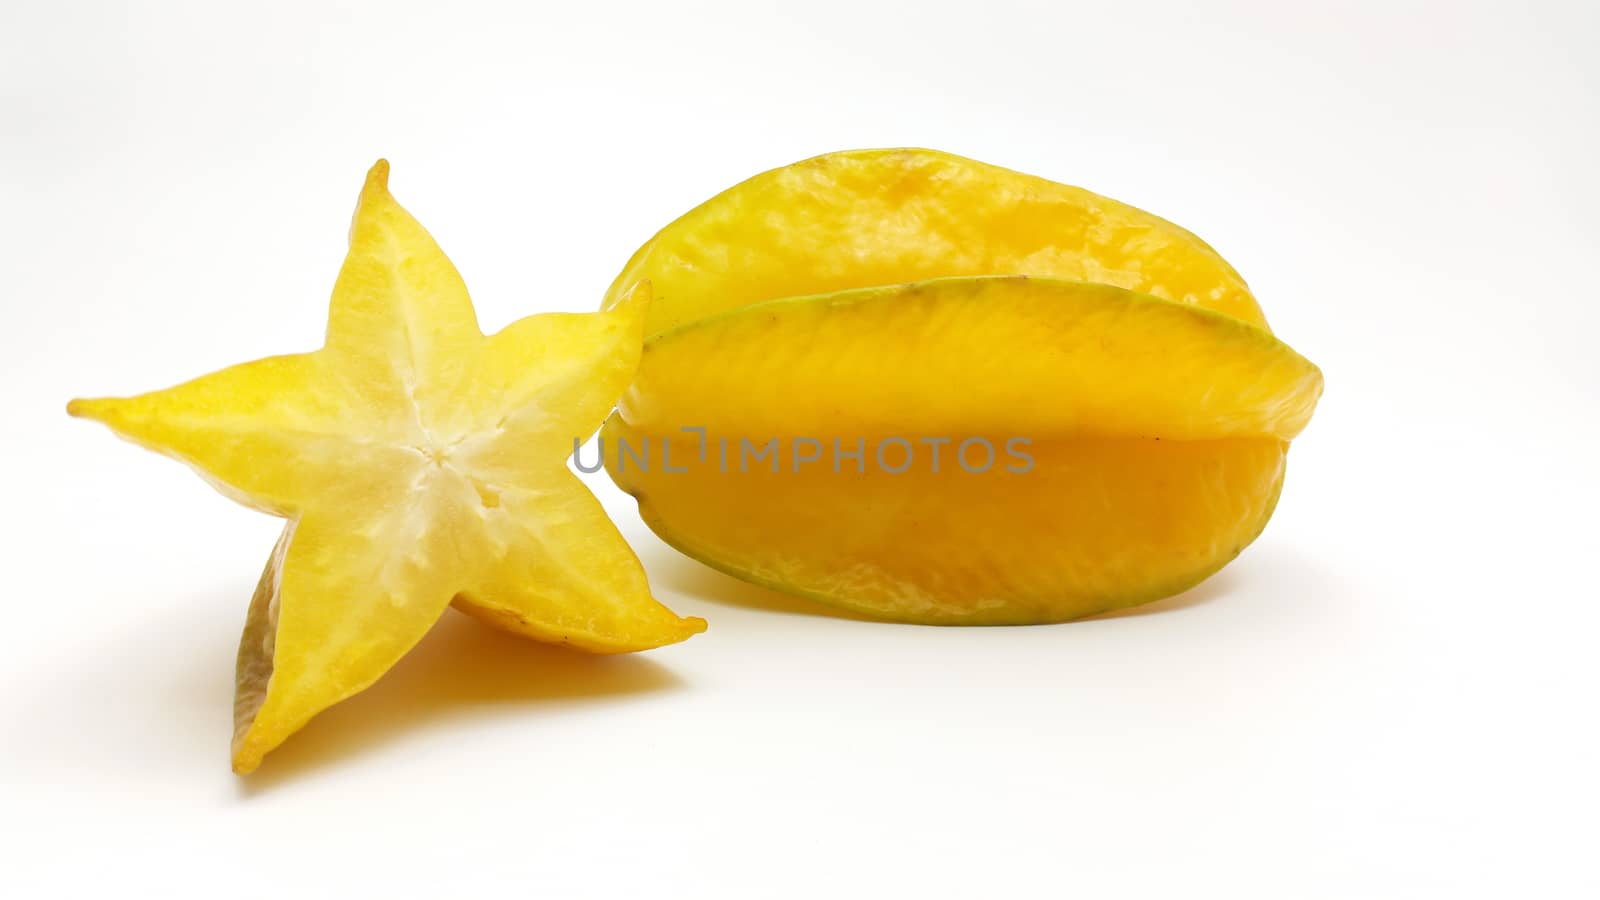 carambola - star fruit with slices on white background